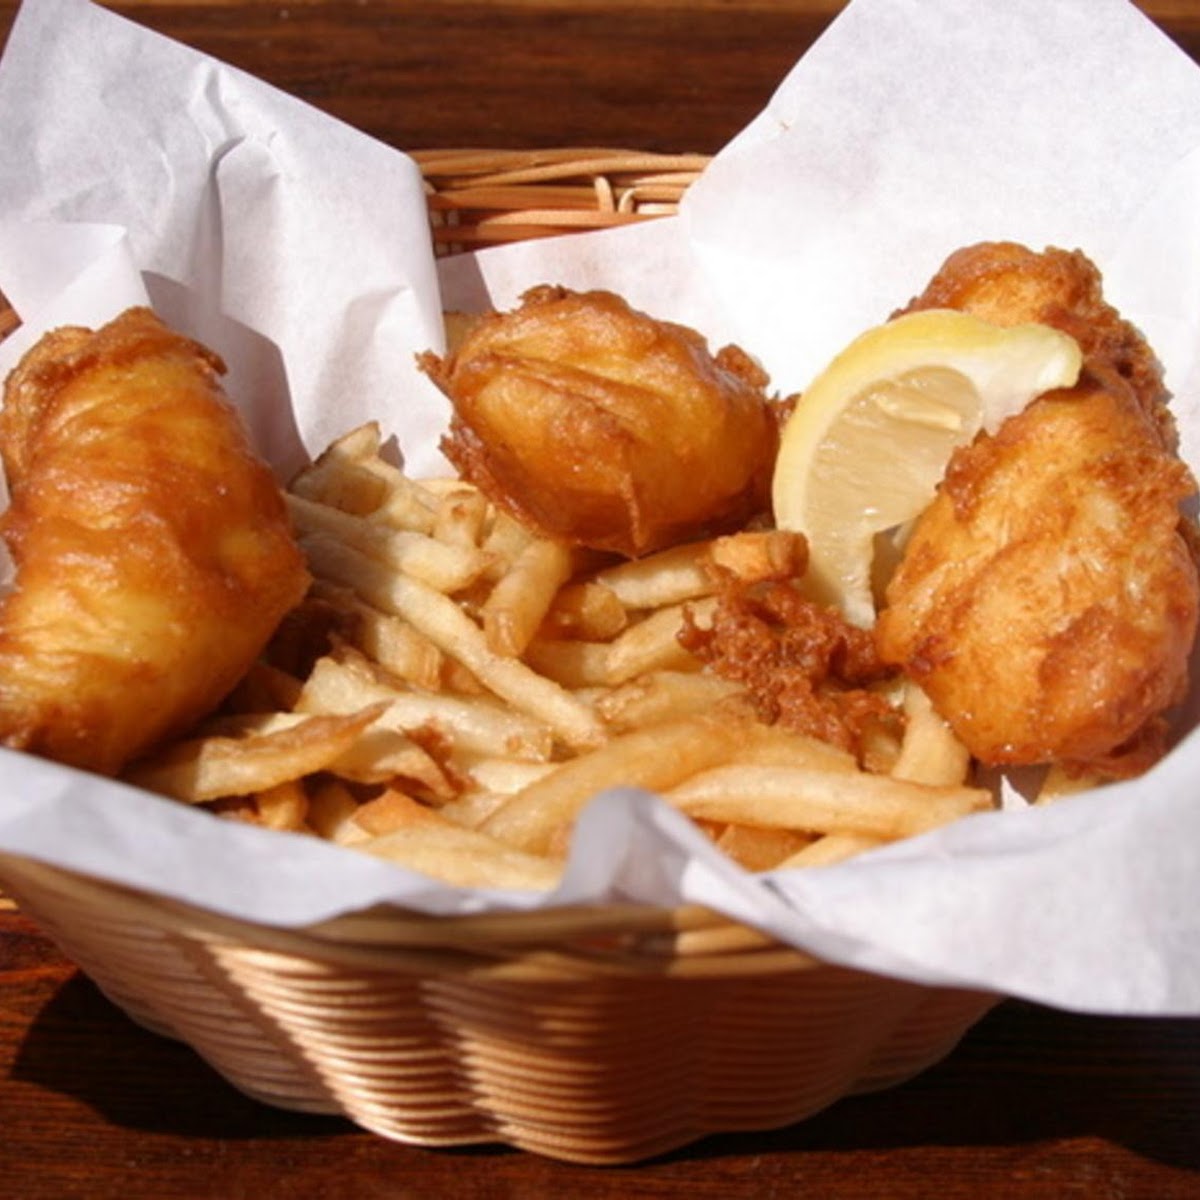 $4 Fish and Chips